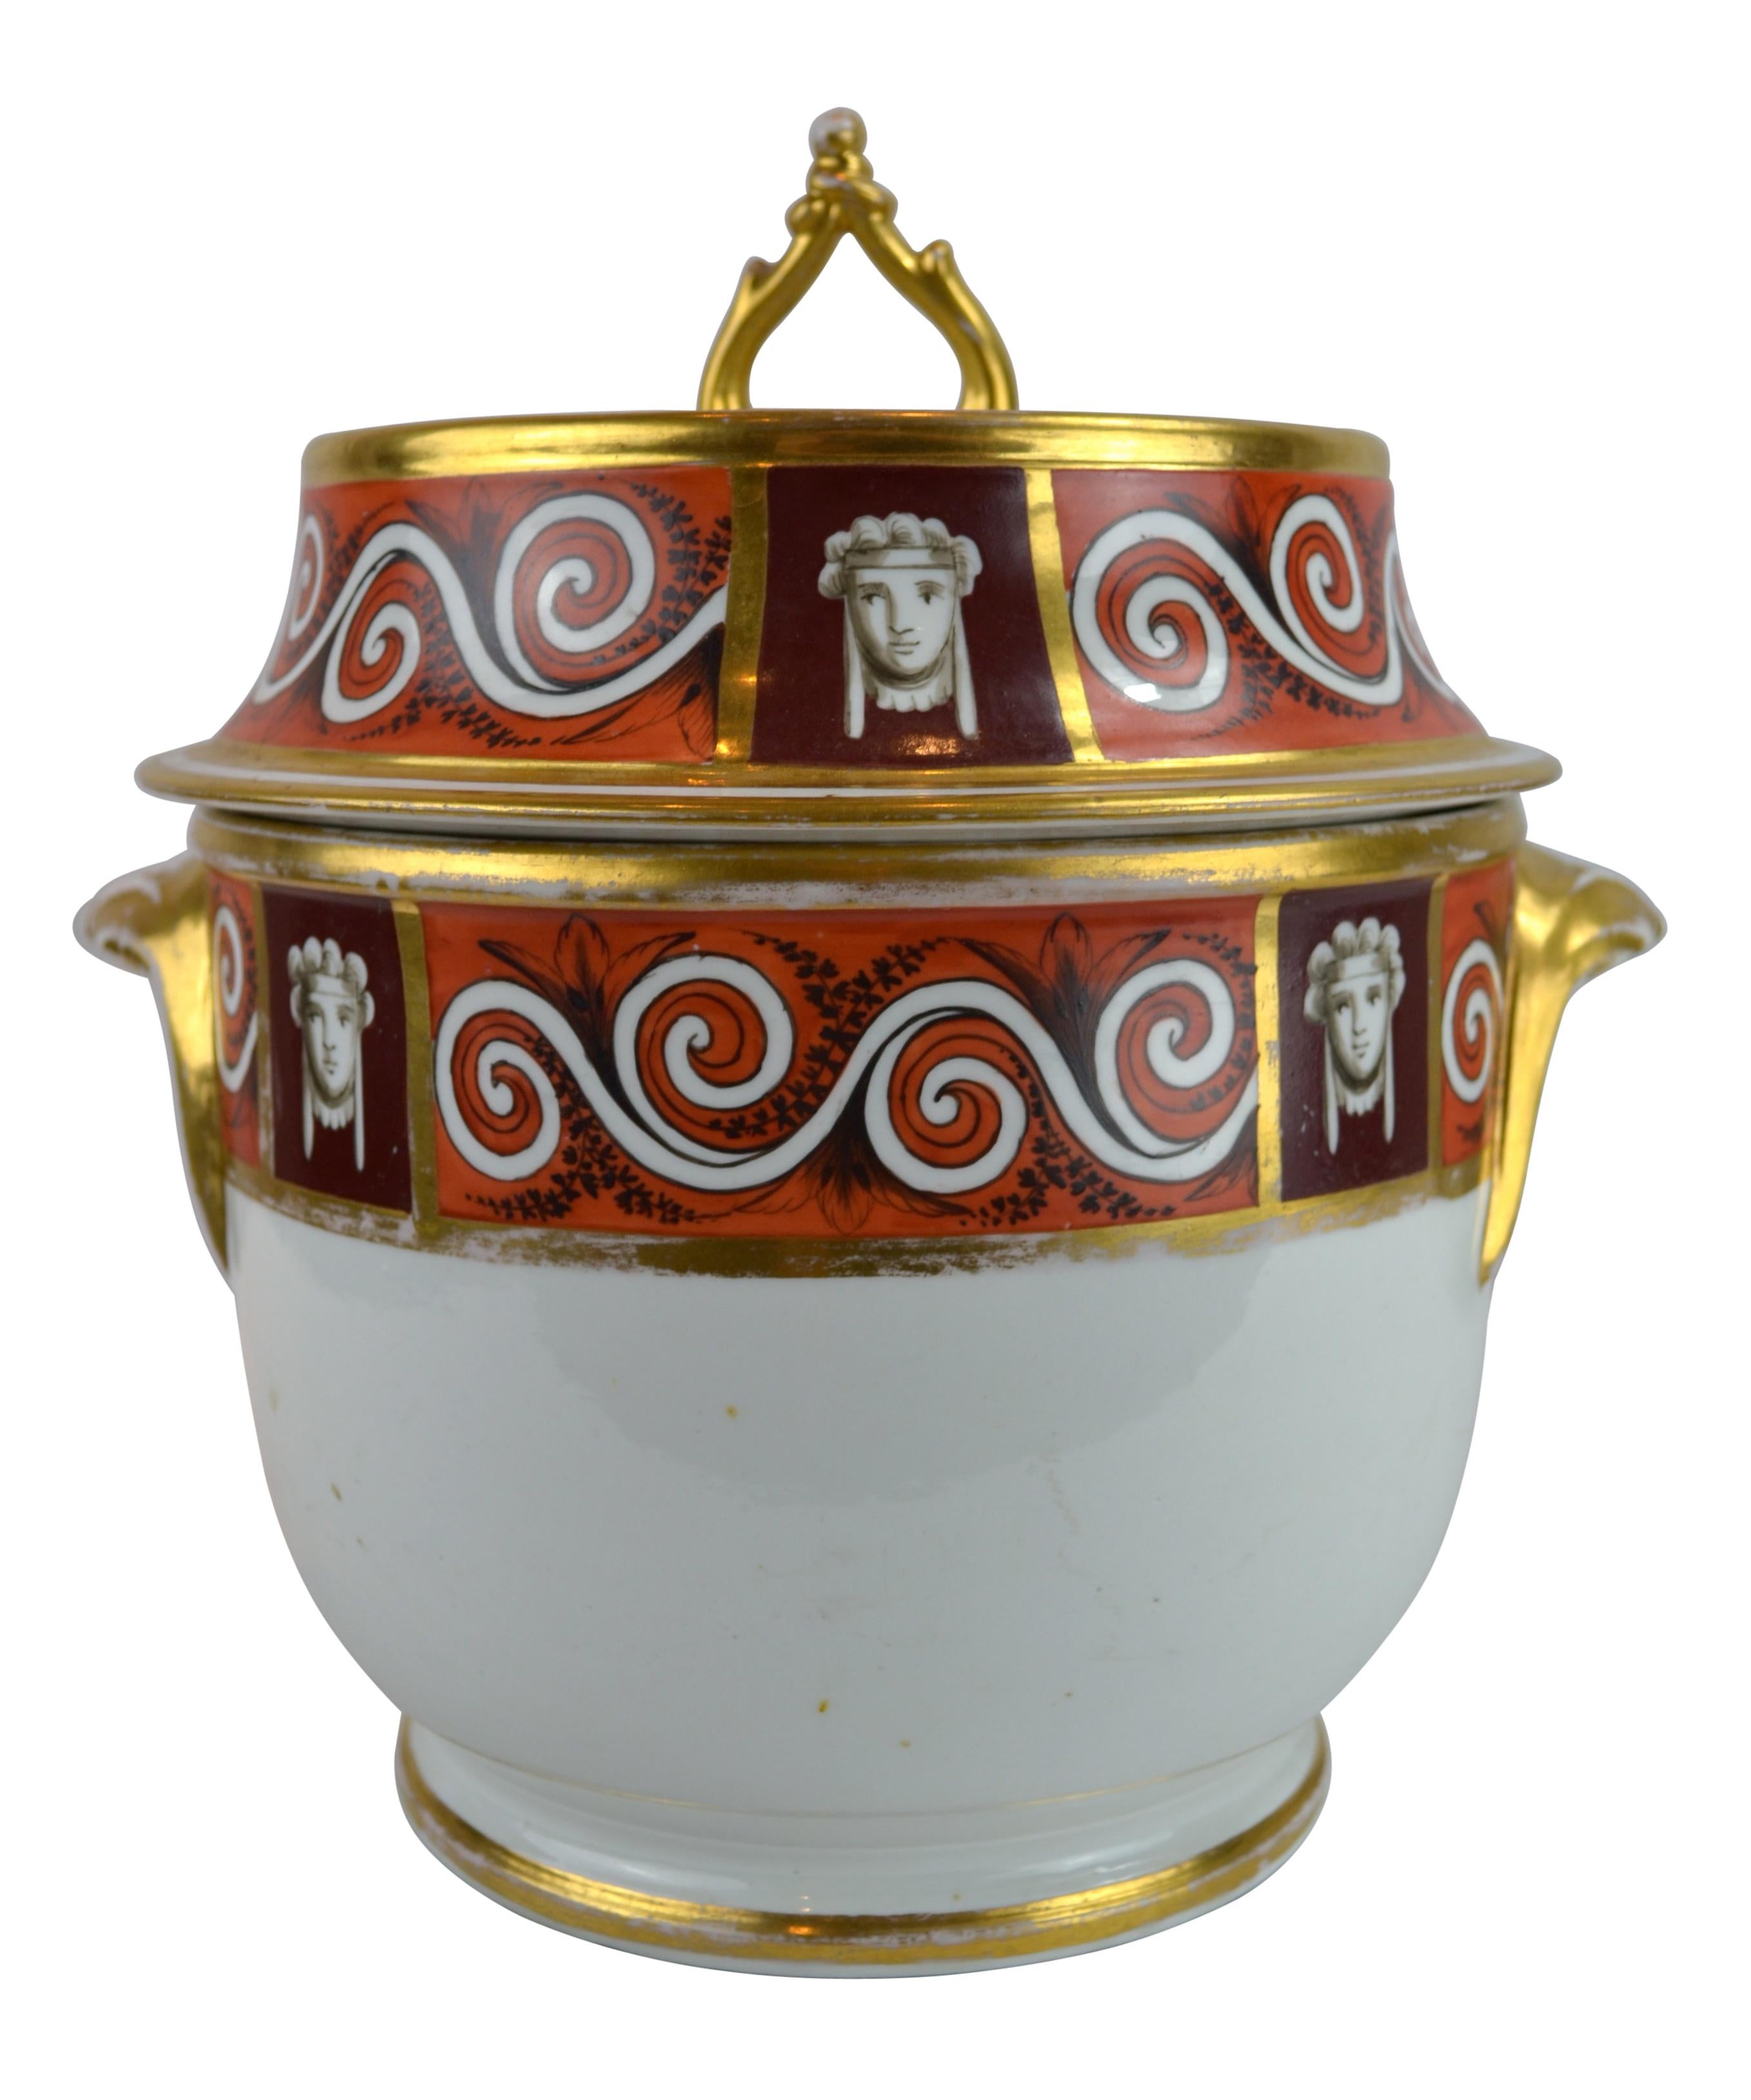 Early 19th century English Caolport fruit cooler complete with lid and a matching sauce turreen with lid and saucer with classical decoration, mythological heads, scrolls, etruscan colouring etc. All pieces are intact with no cracks chips or repair